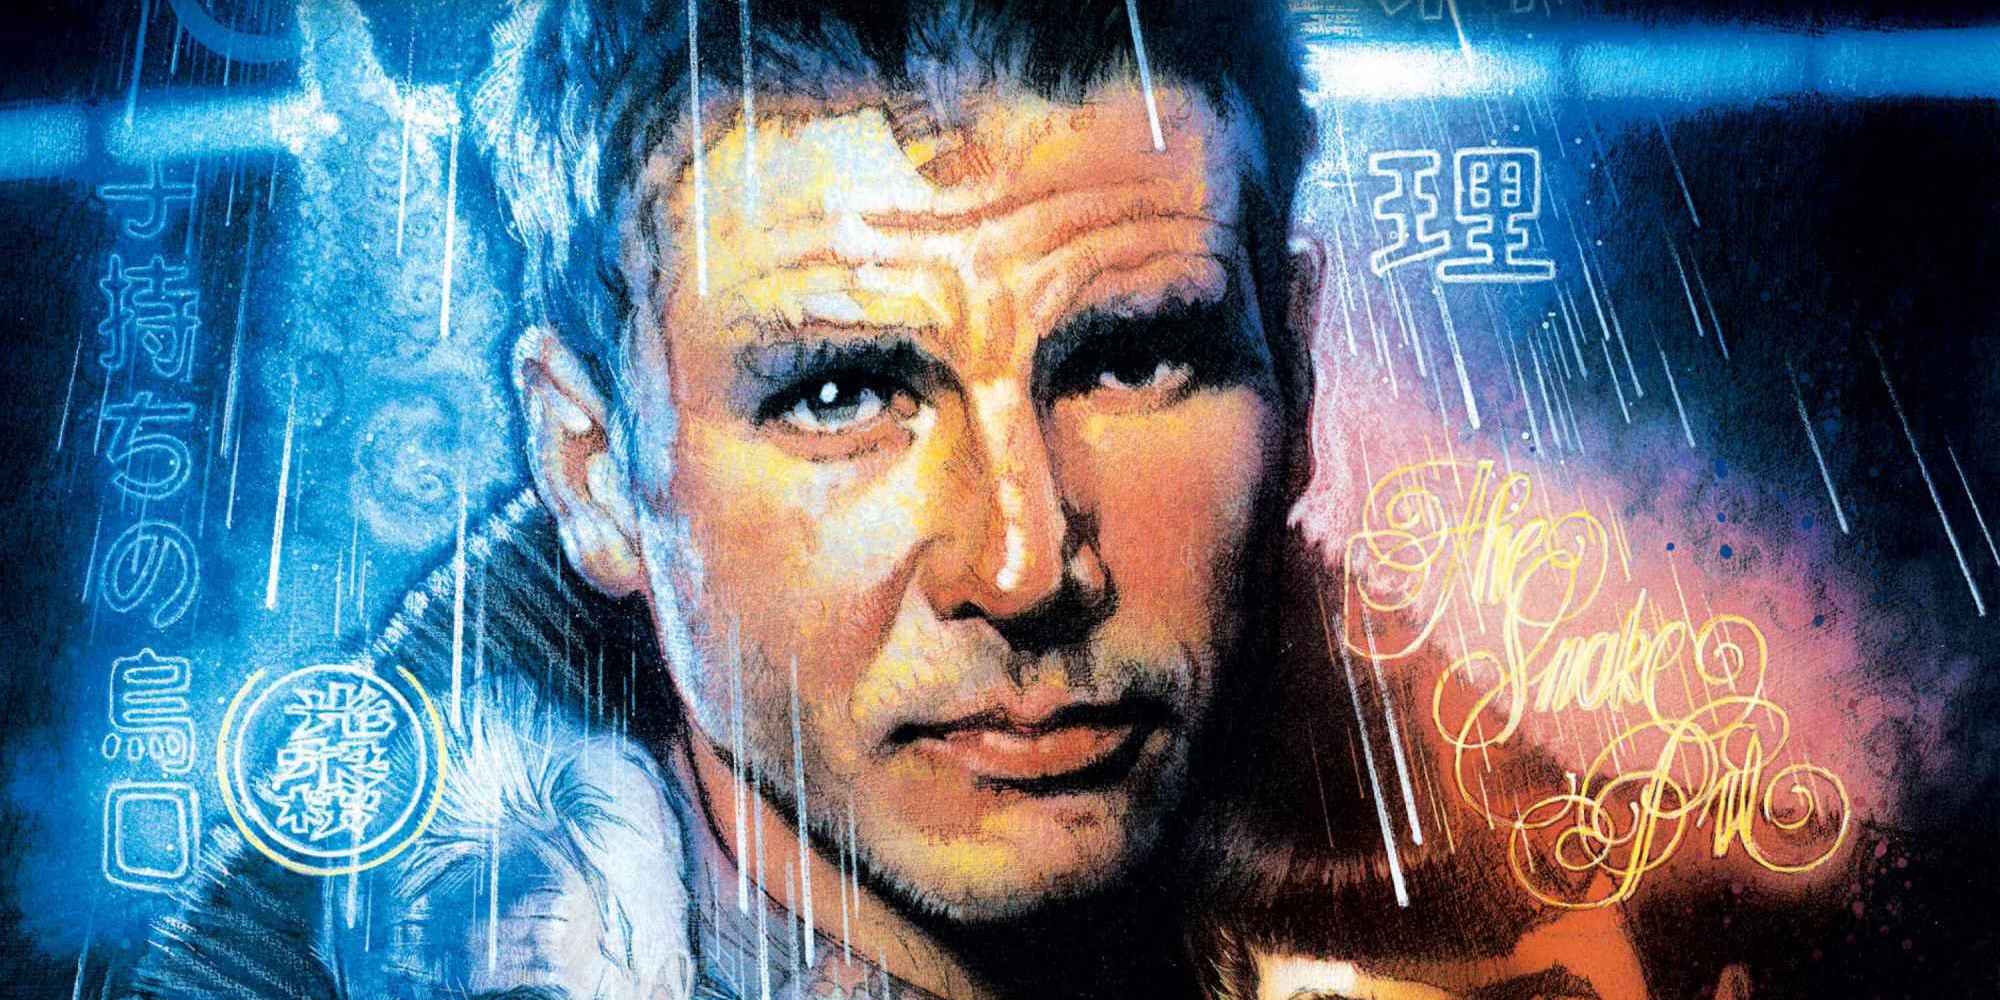 BLADE RUNNER Sequel Gets An Early 2018 Release Date